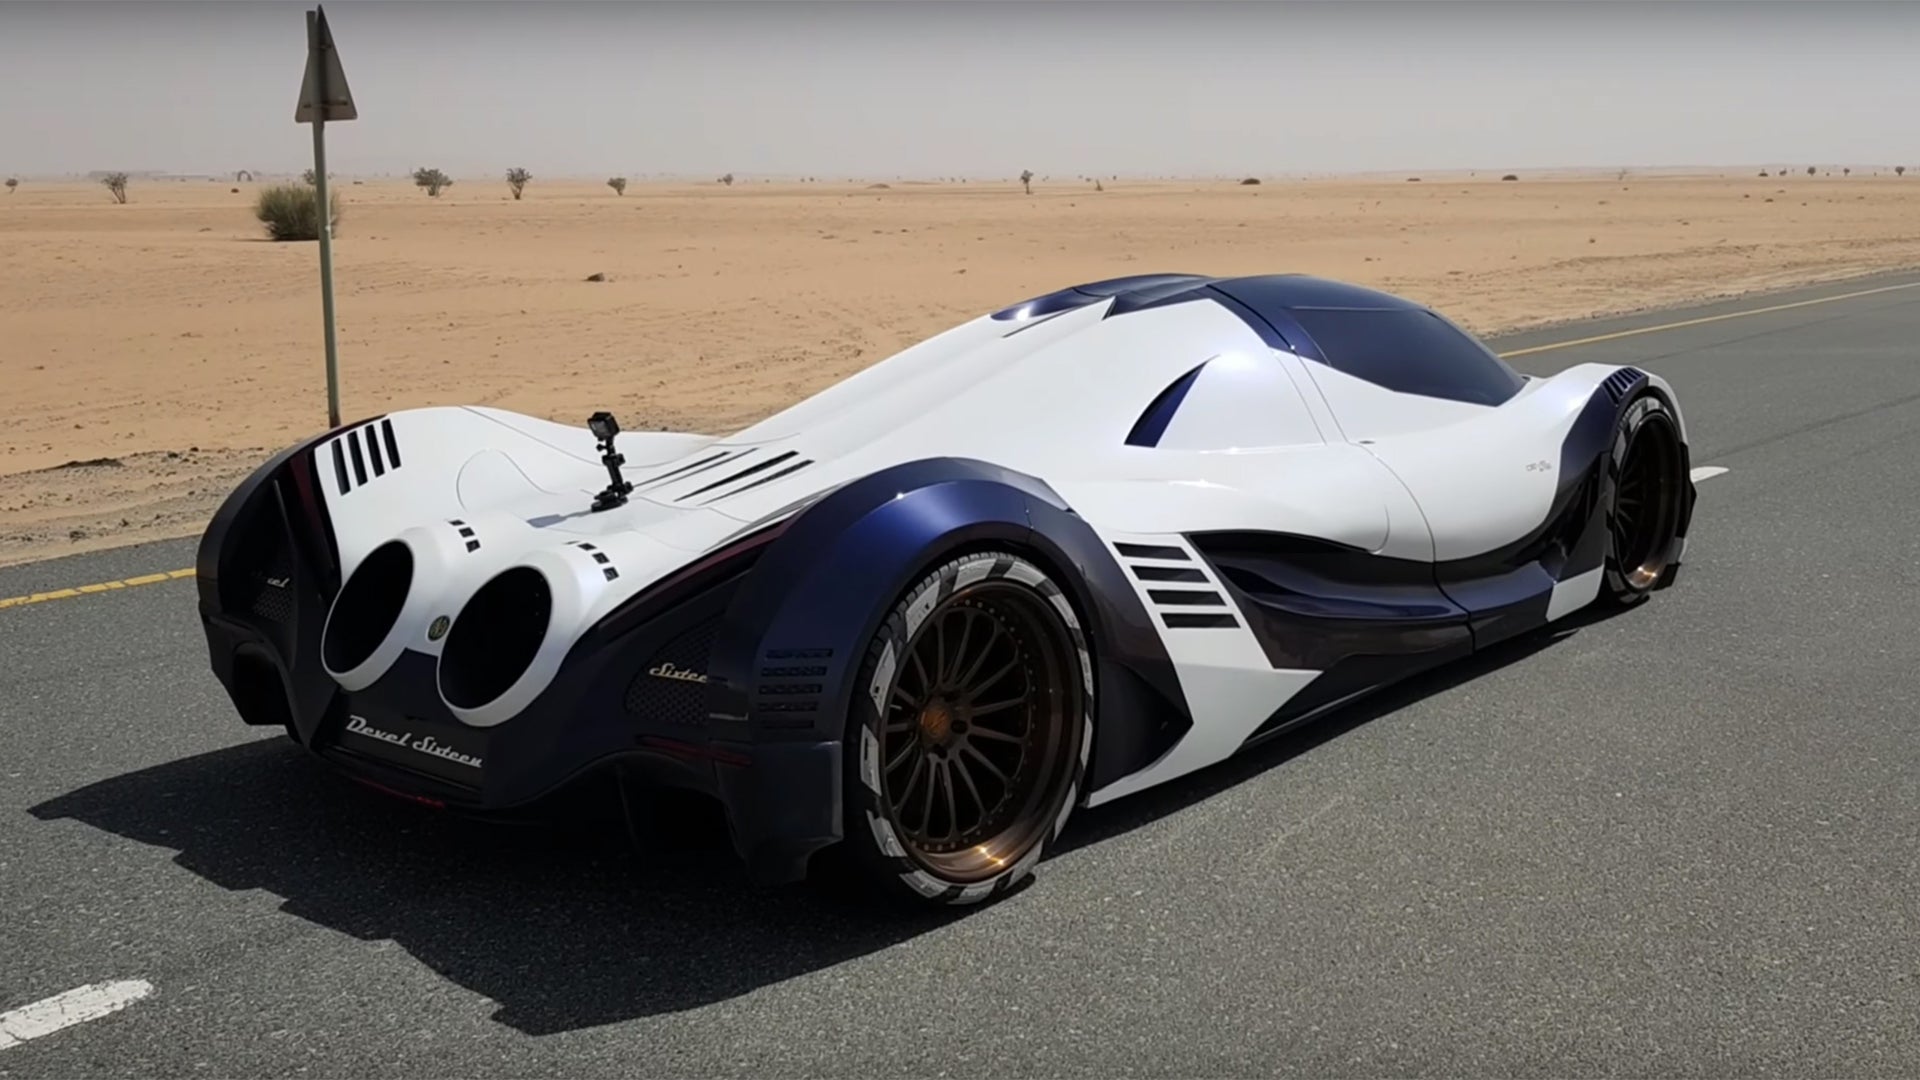 Acceleration Video Shows The Insane 000 Horsepower Devel Sixteen Hypercar Is Real